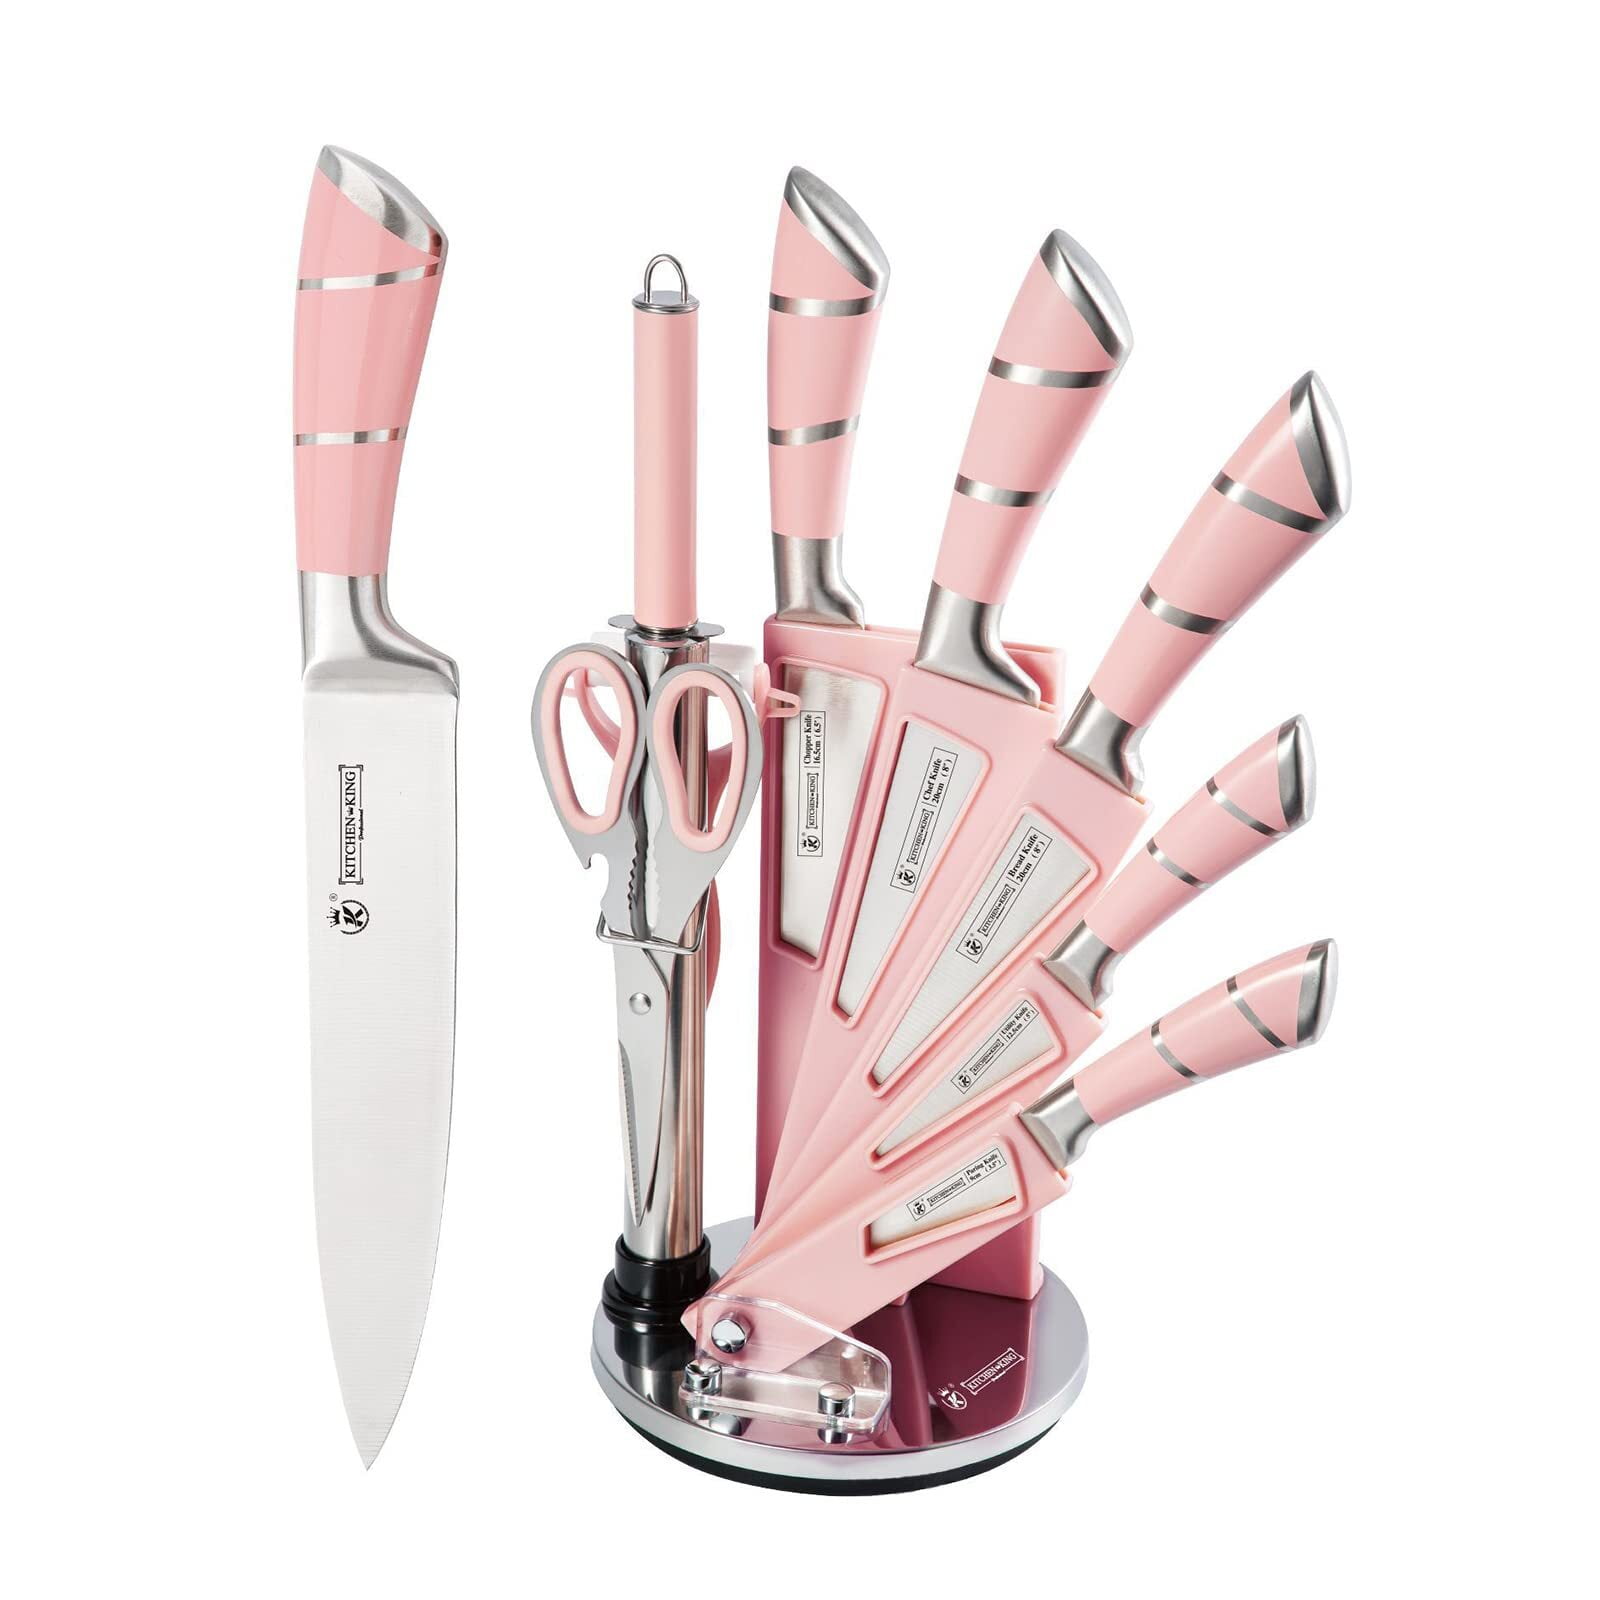 11 pcs Colorful Knife Set,Sharp Kitchen Knives Sets for Slicing Paring and  Cooking, Professional Cute Pink Chefs Knife Set fit to Bbq RV